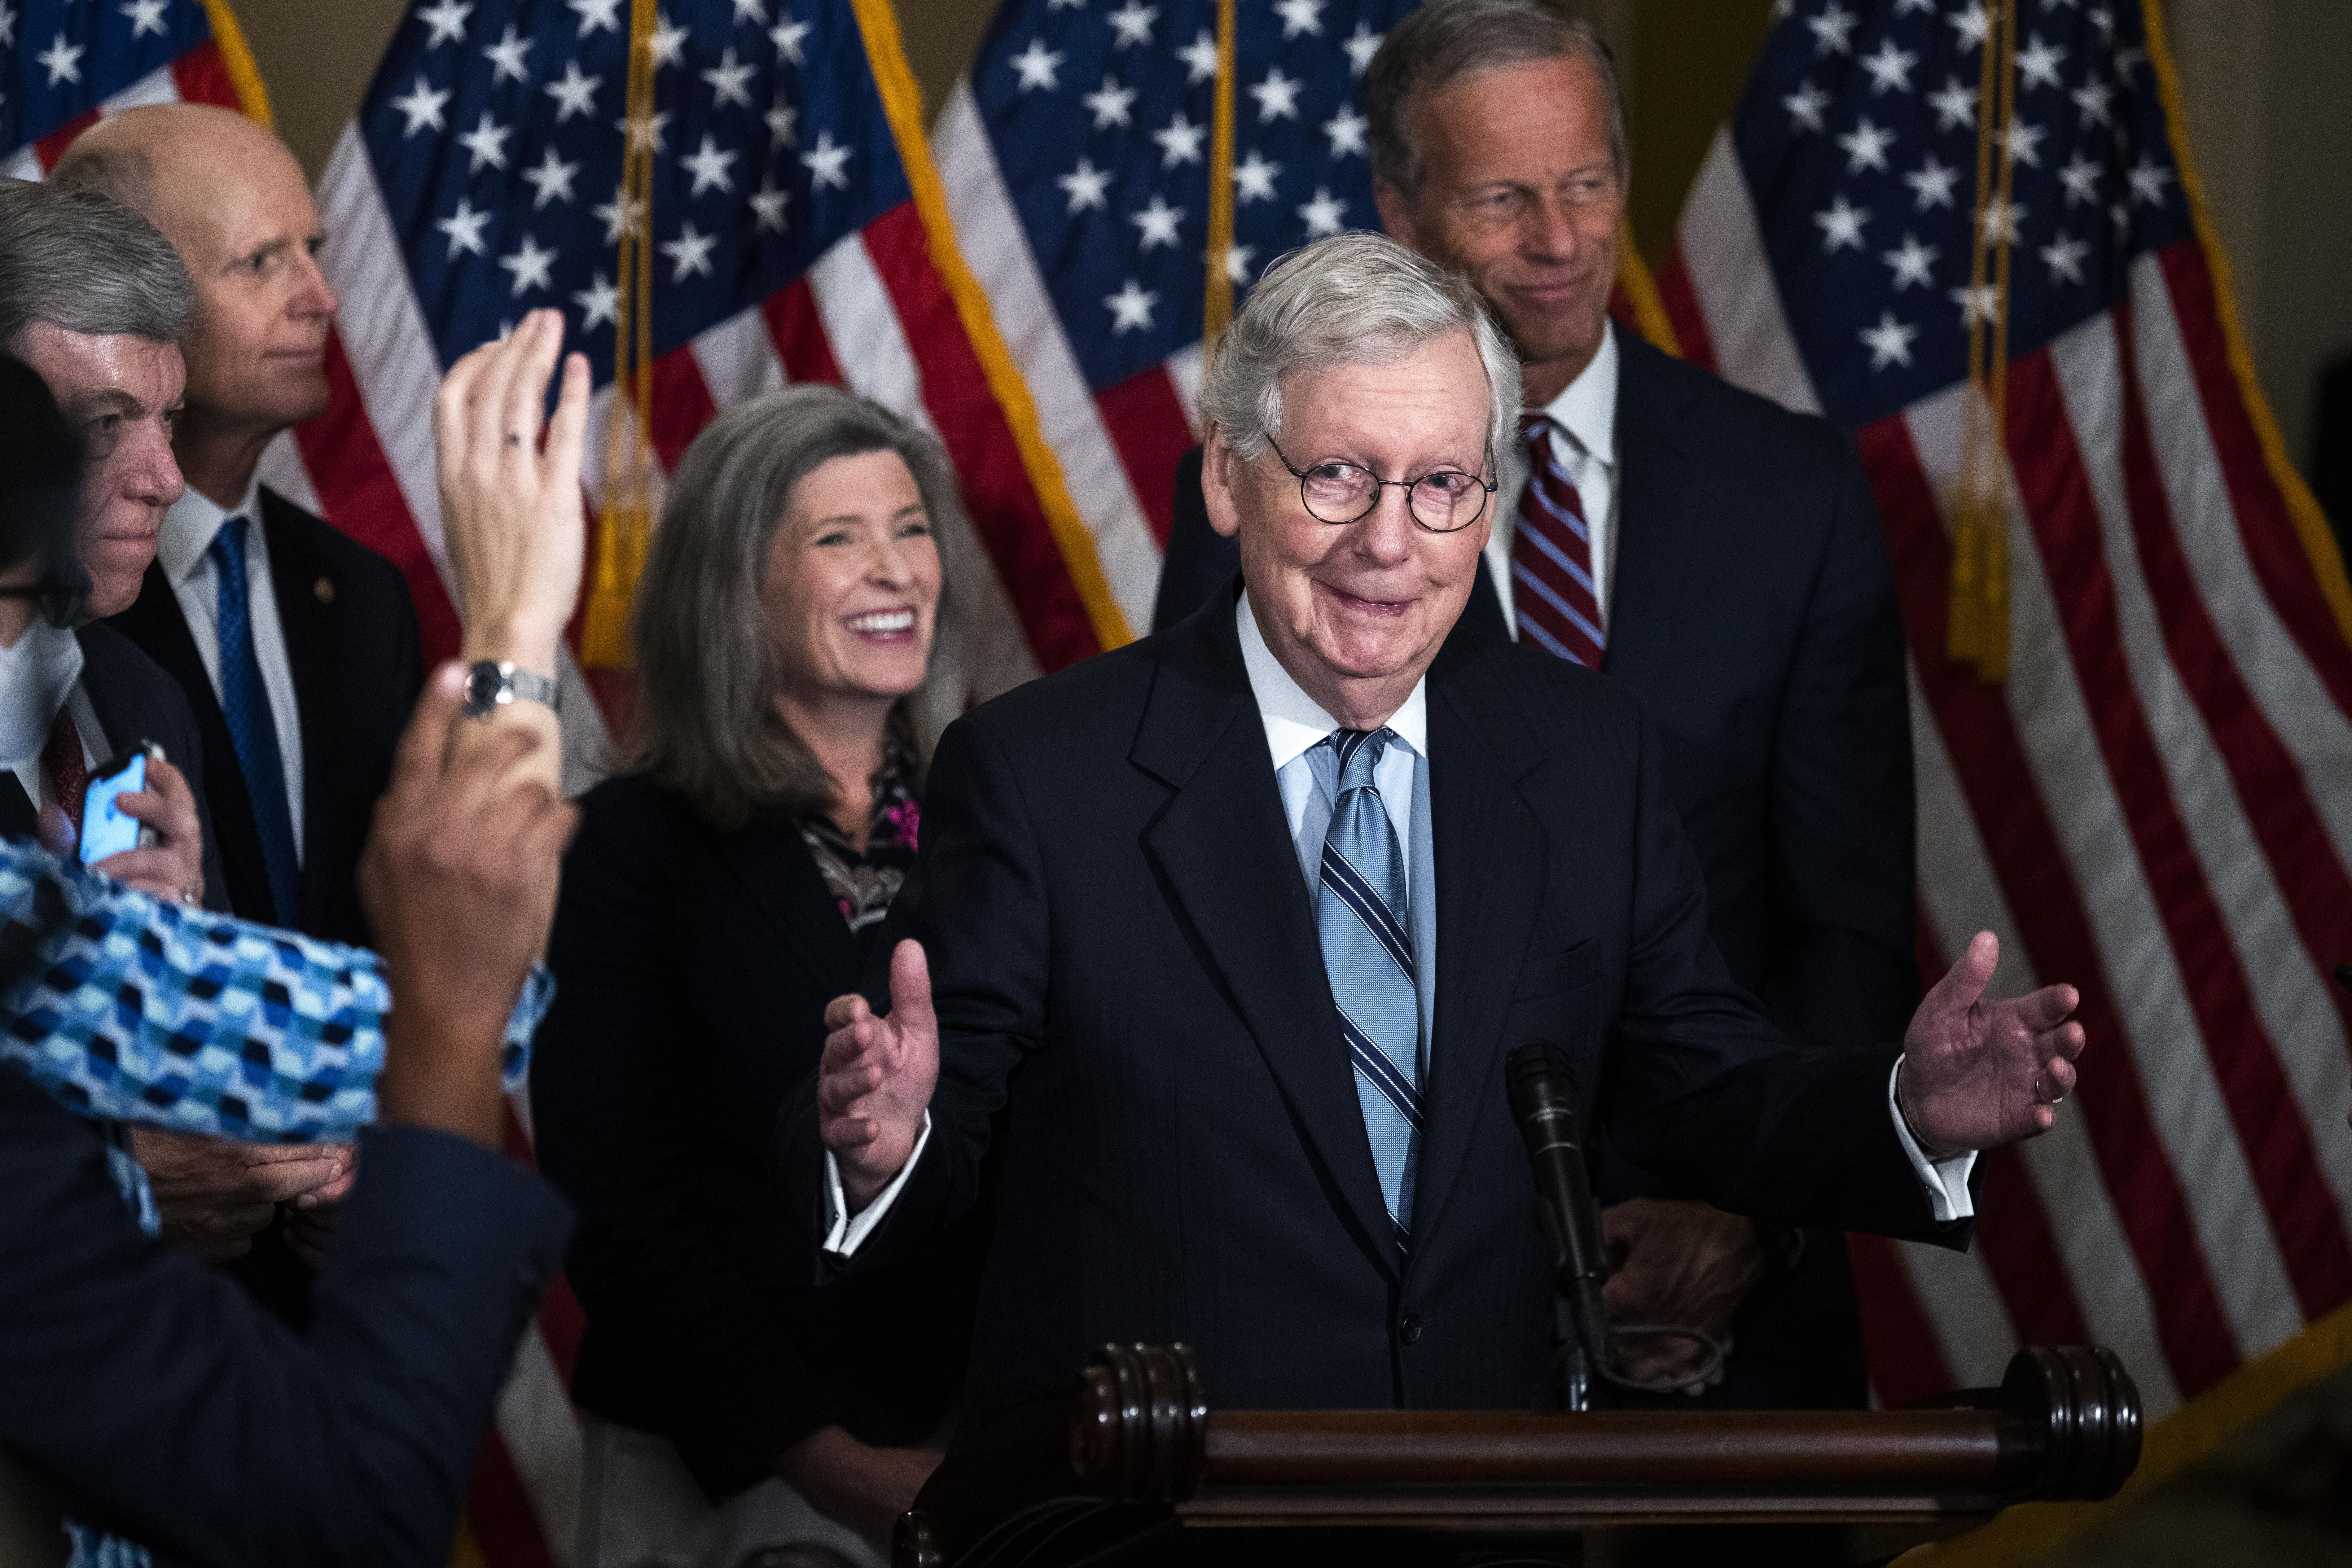 Senate Minority Leader Mitch McConnell (R-Ky.) conducts a news conference in the U.S. Capitol on Tuesday, September 20, 2022.